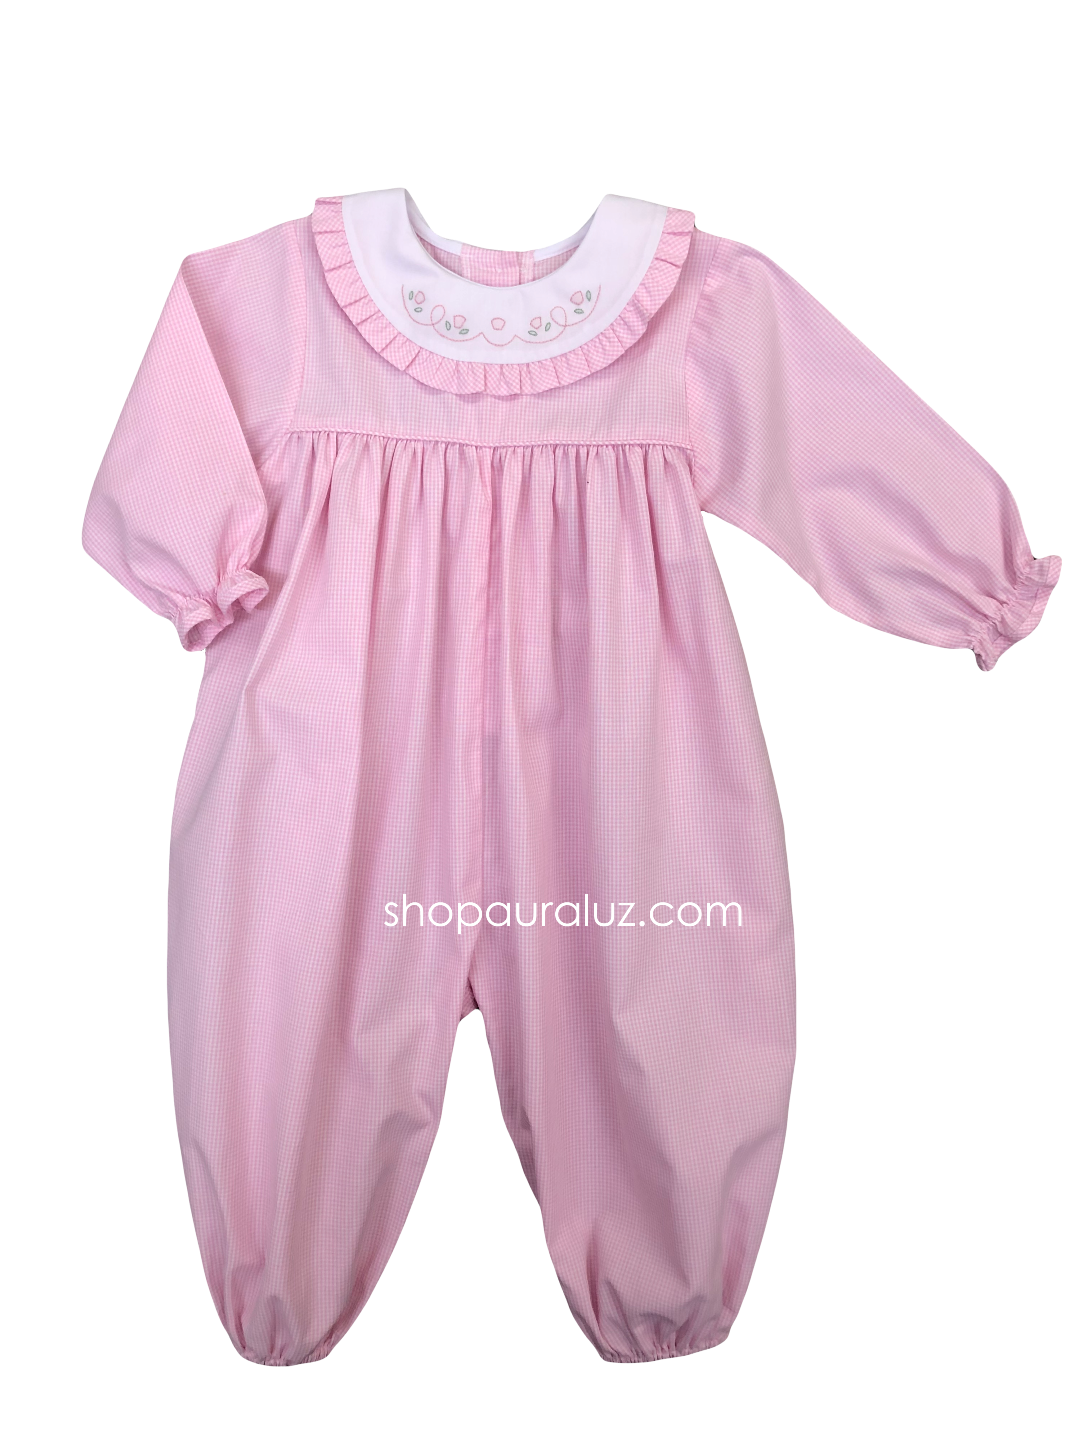 Auraluz Girl Longall...Pink micro check w/round ruffle trim collar and embroidered flowers